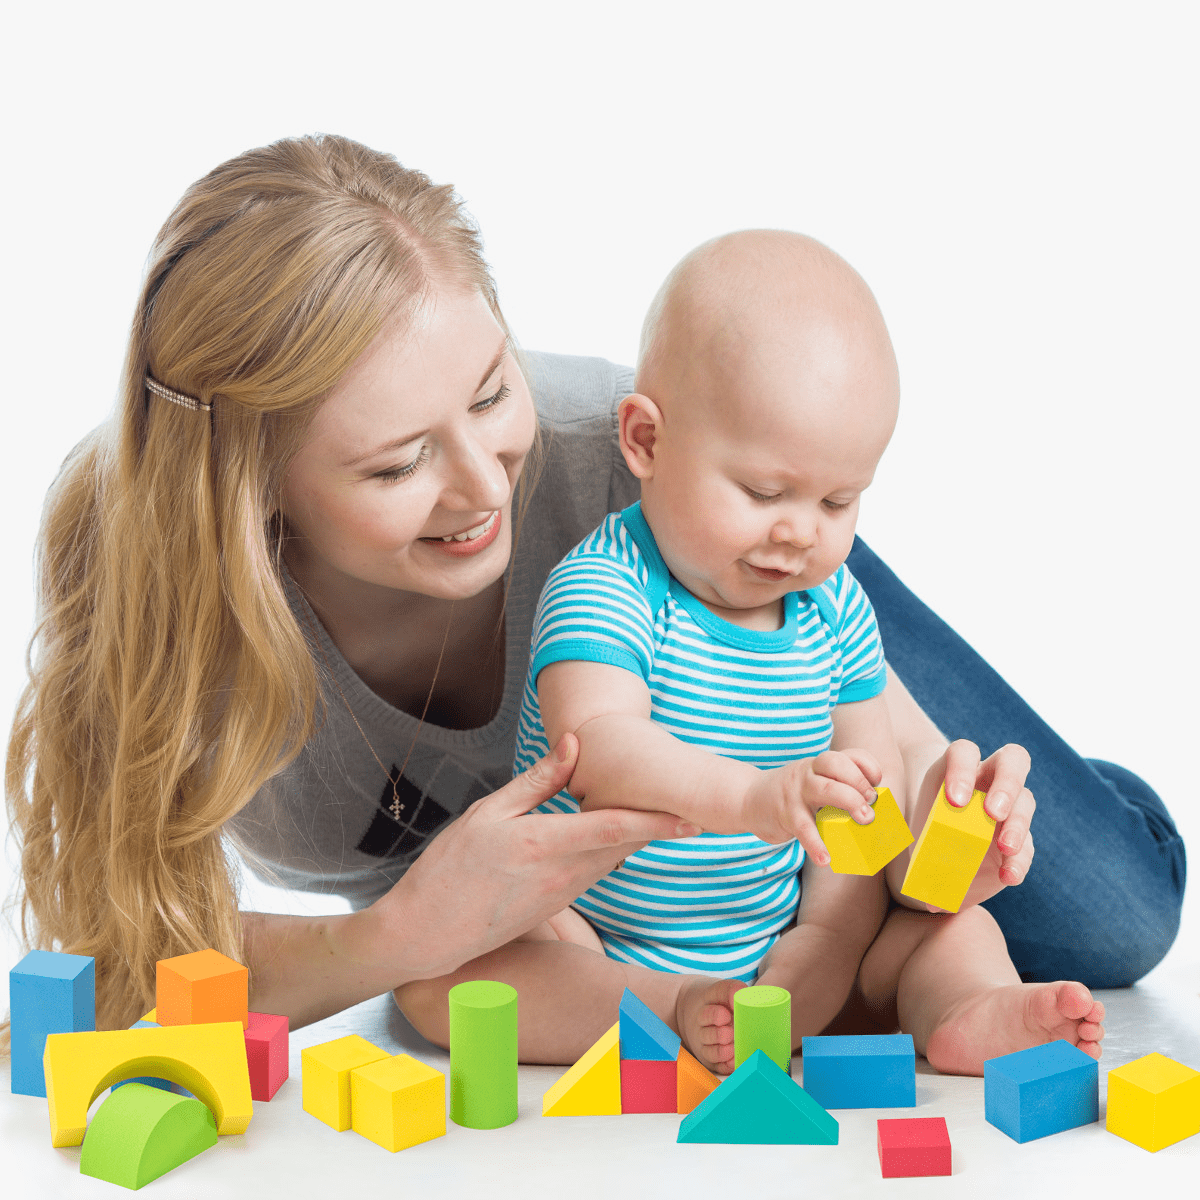 UNIH Building Blocks for Toddlers 1-3, Foam Blocks Toys Soft Blocks Gifts  Toys Set for 1 2 3 4 Year Old Boy Girls (46PCS)